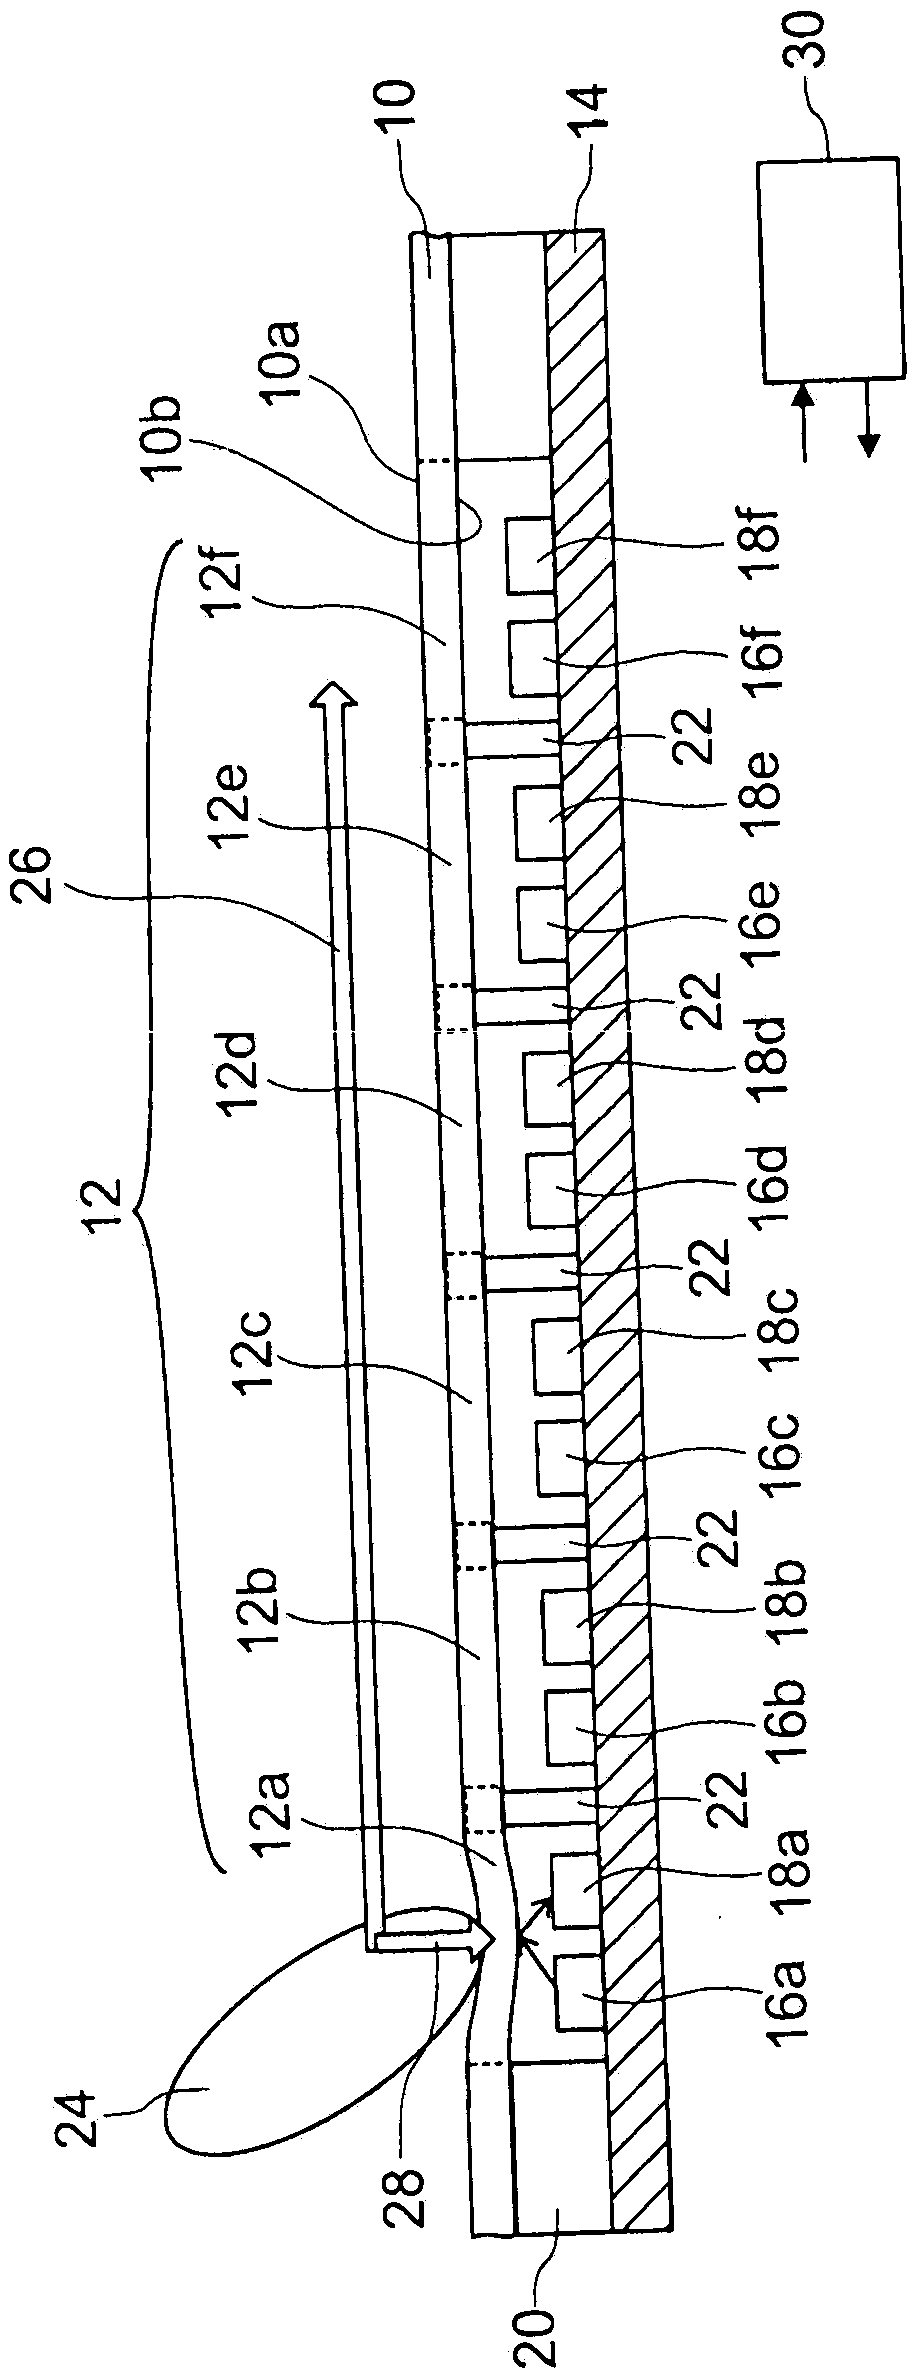 Operator control apparatus, in particular for electronic domestic appliance